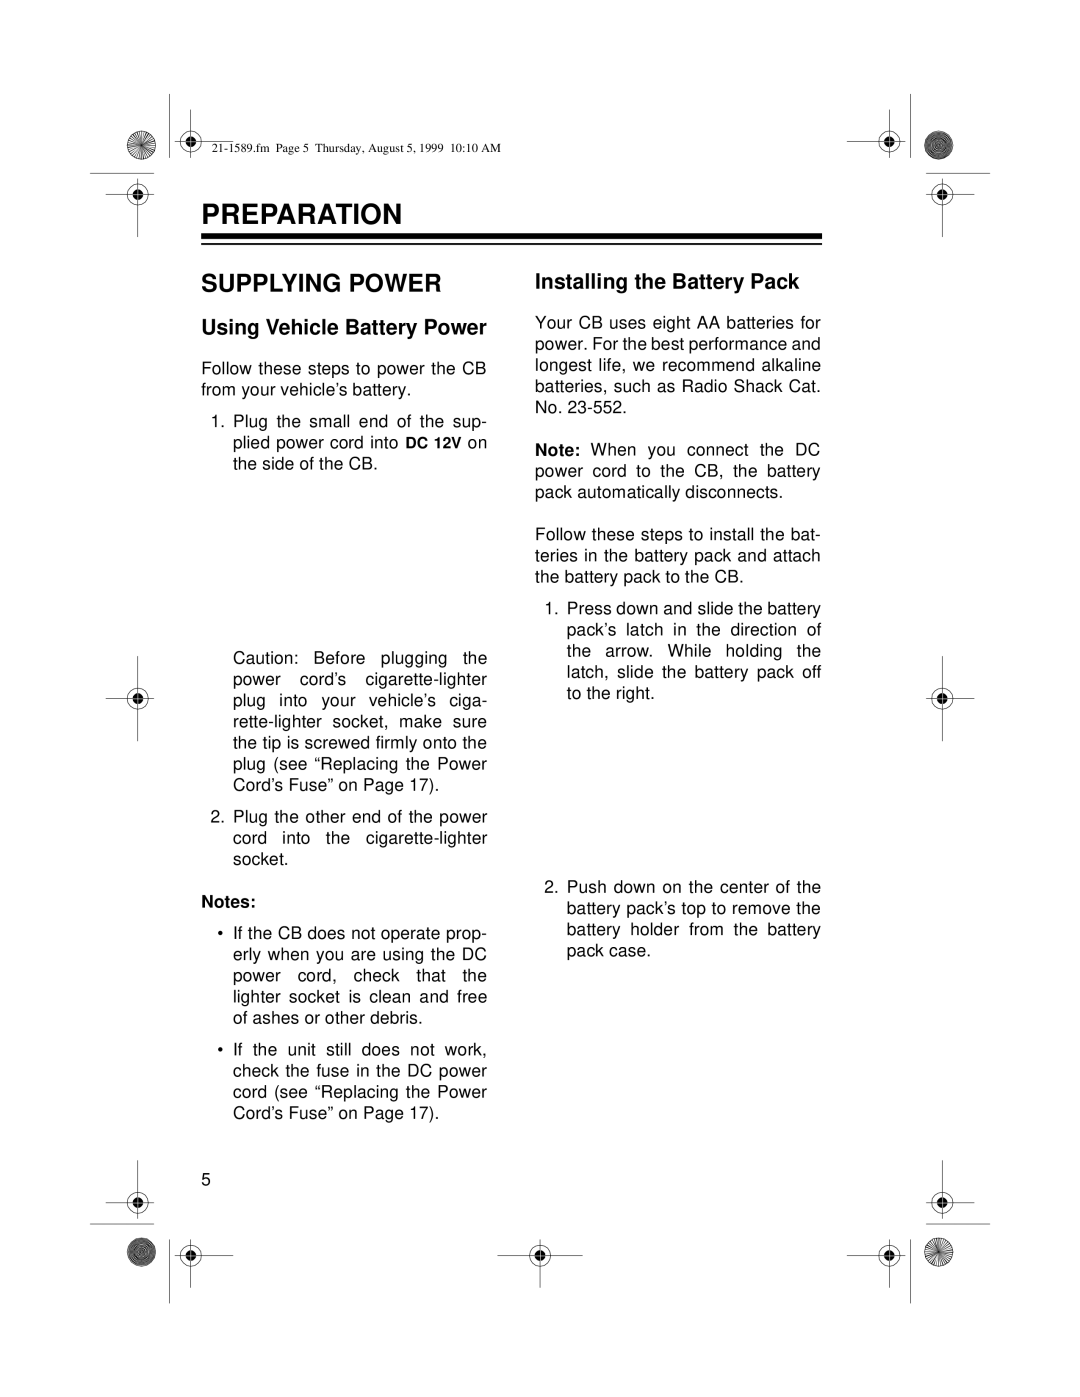 Radio Shack TRC-494 owner manual Preparation, Supplying Power, Using Vehicle Battery Power, Installing the Battery Pack 